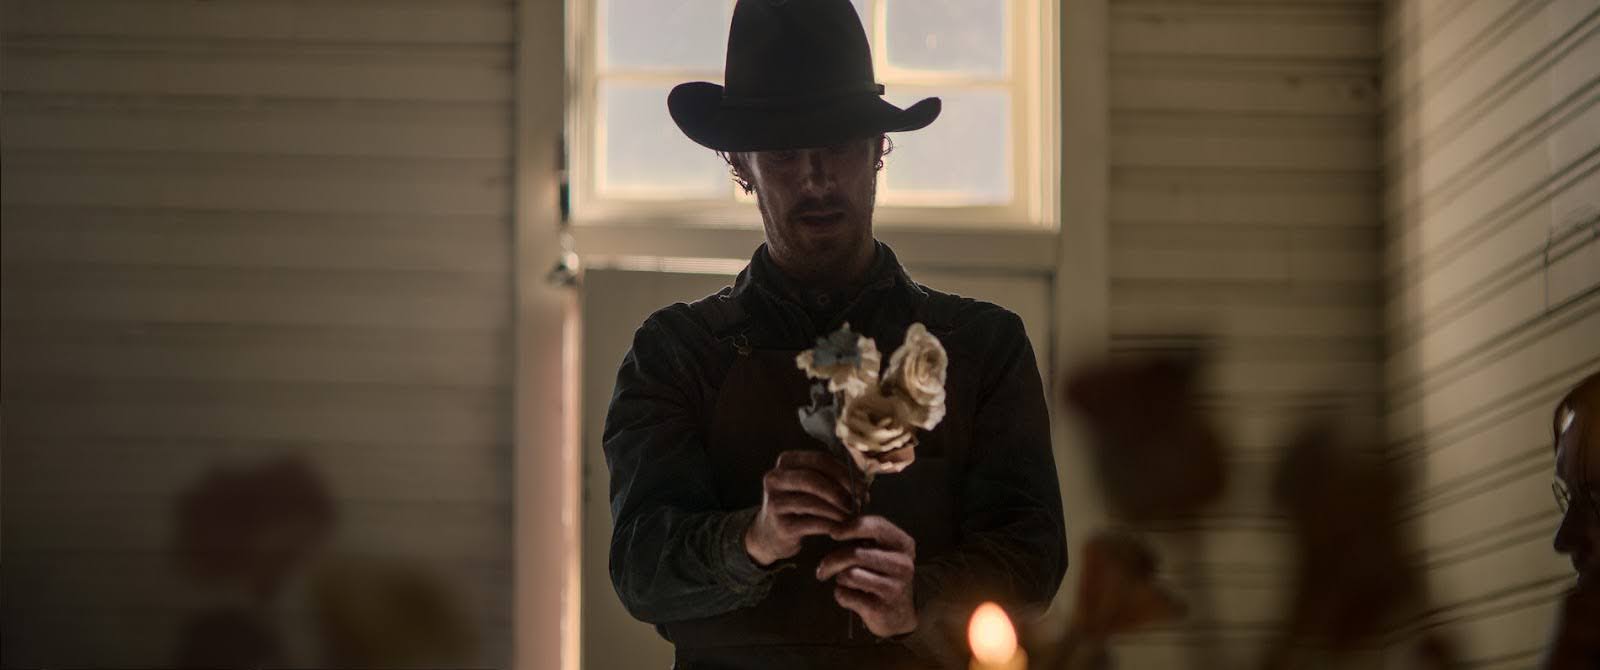  A man in a cowboy hat holds a small bouquet of white roses in this image from See-Saw Films.